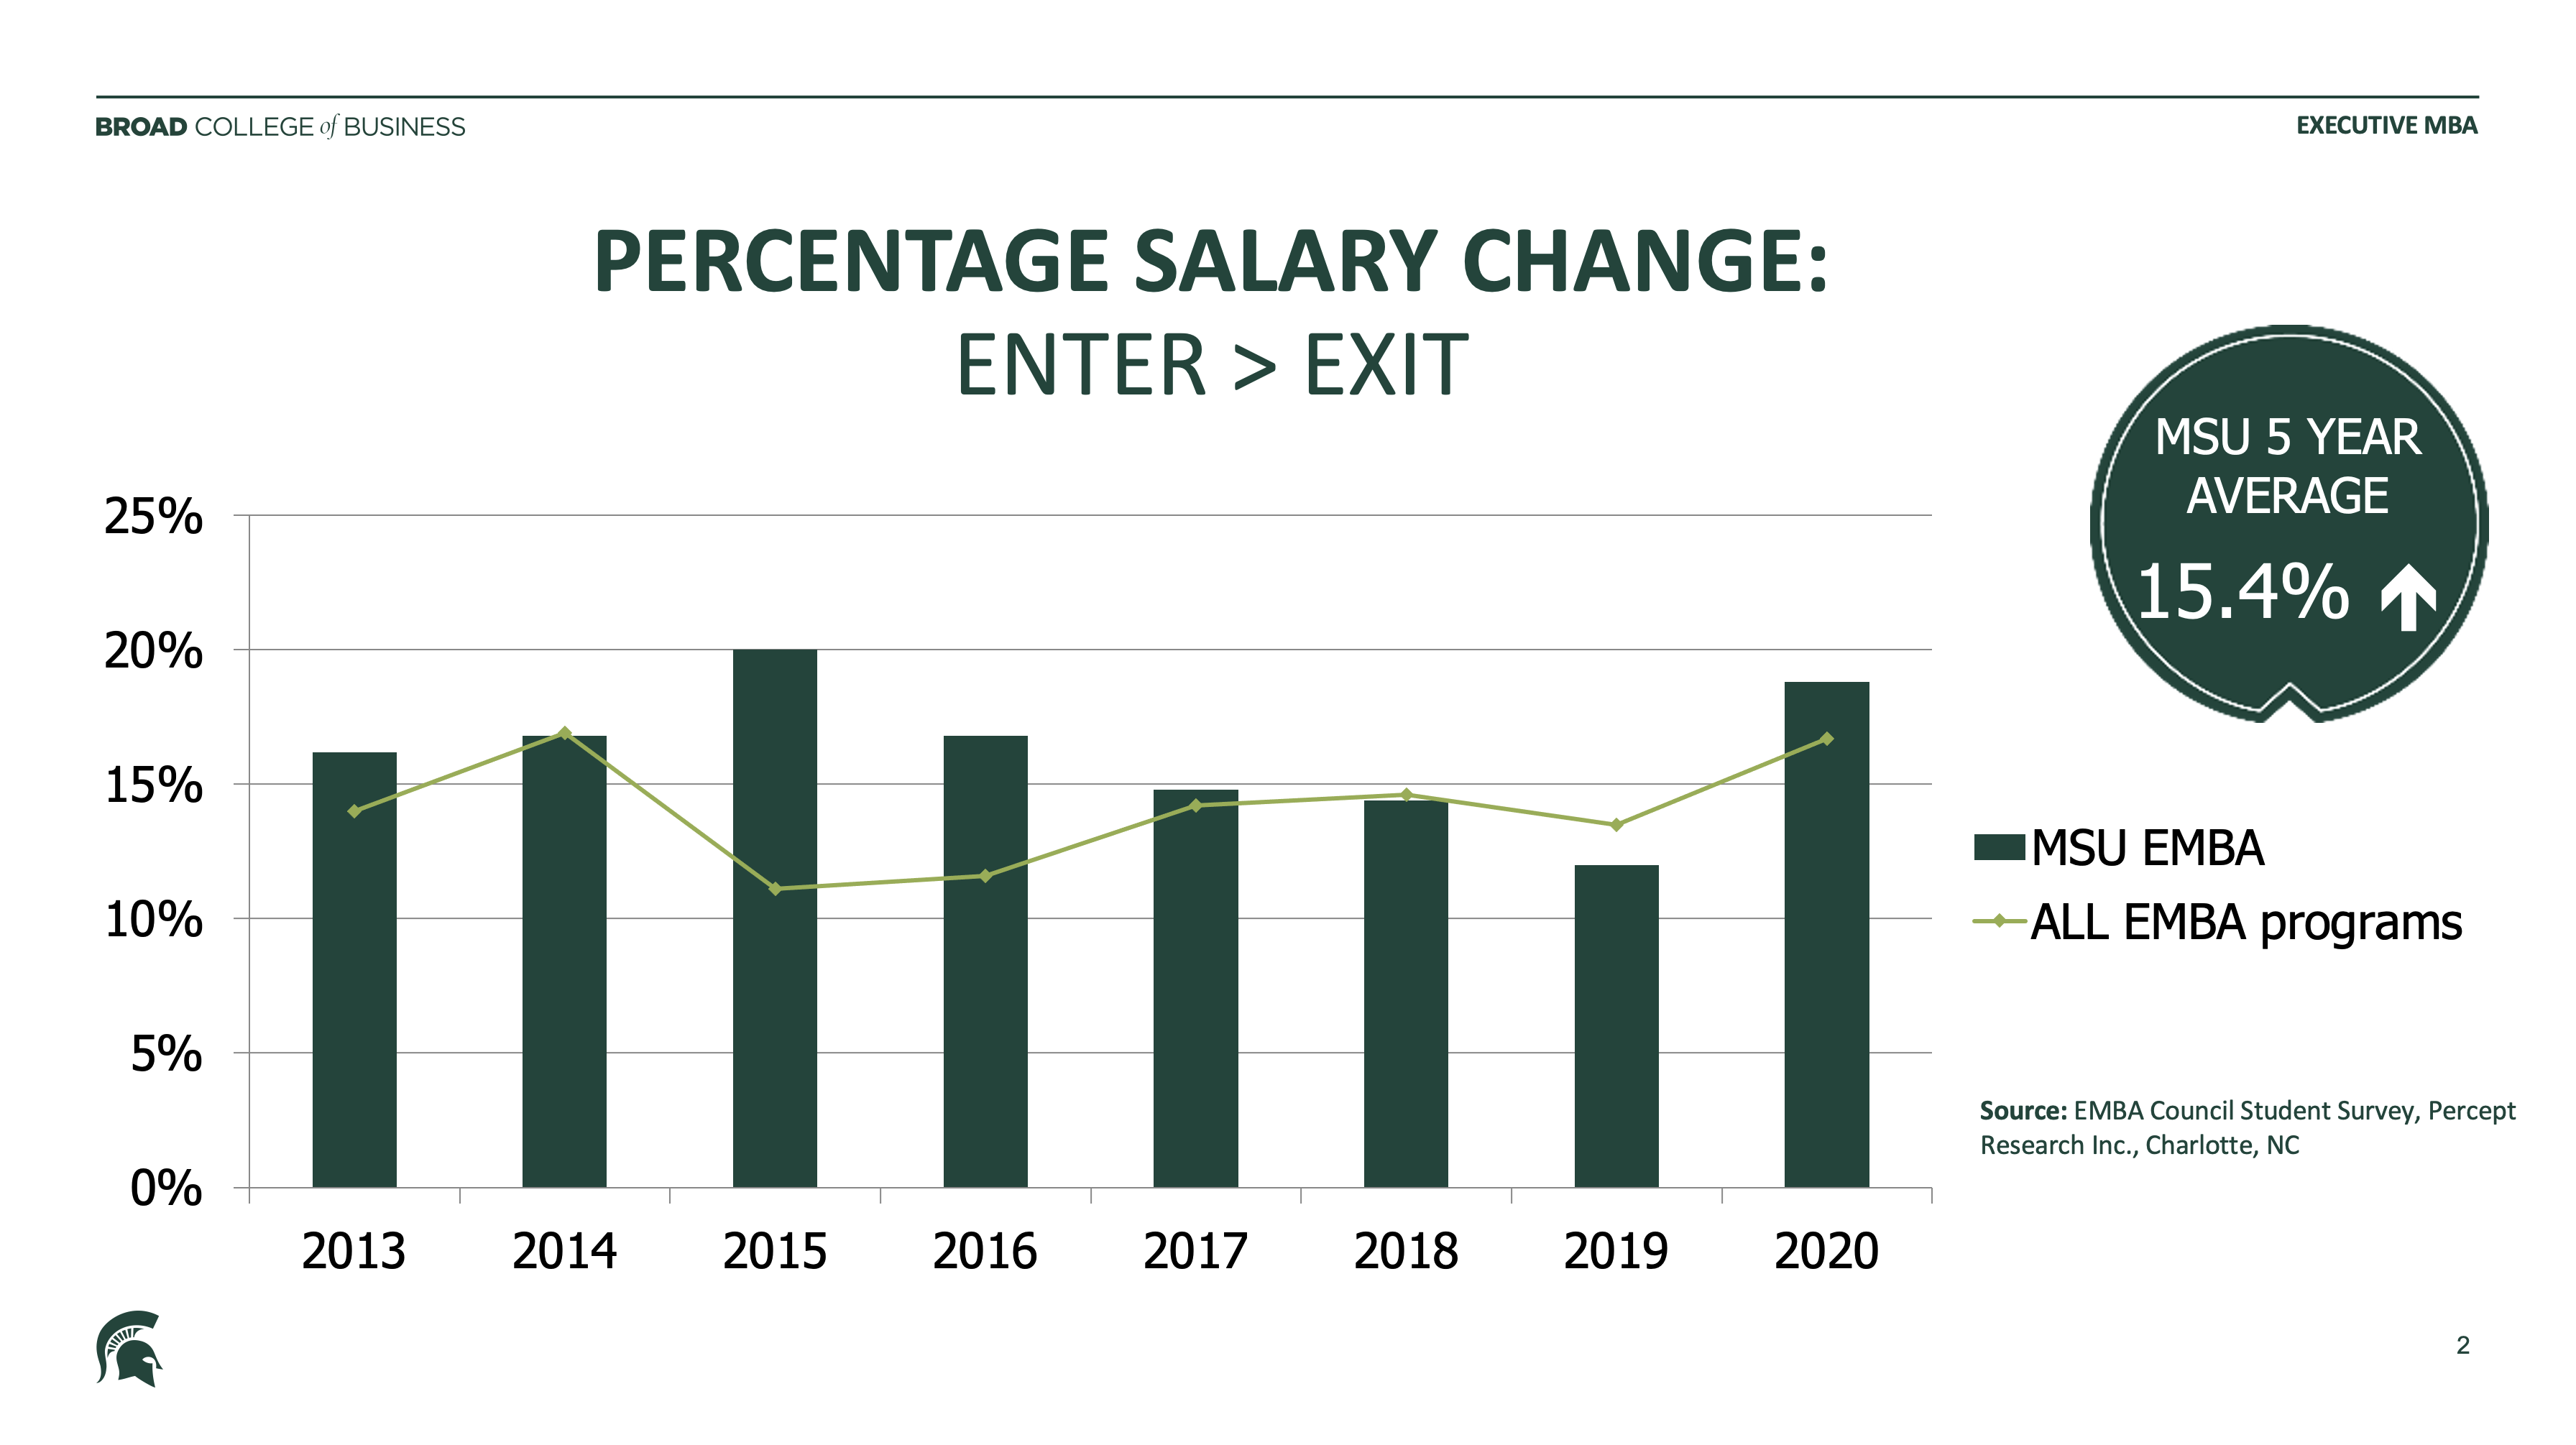 bar chart showing Percentage Salary Change from enter to exit